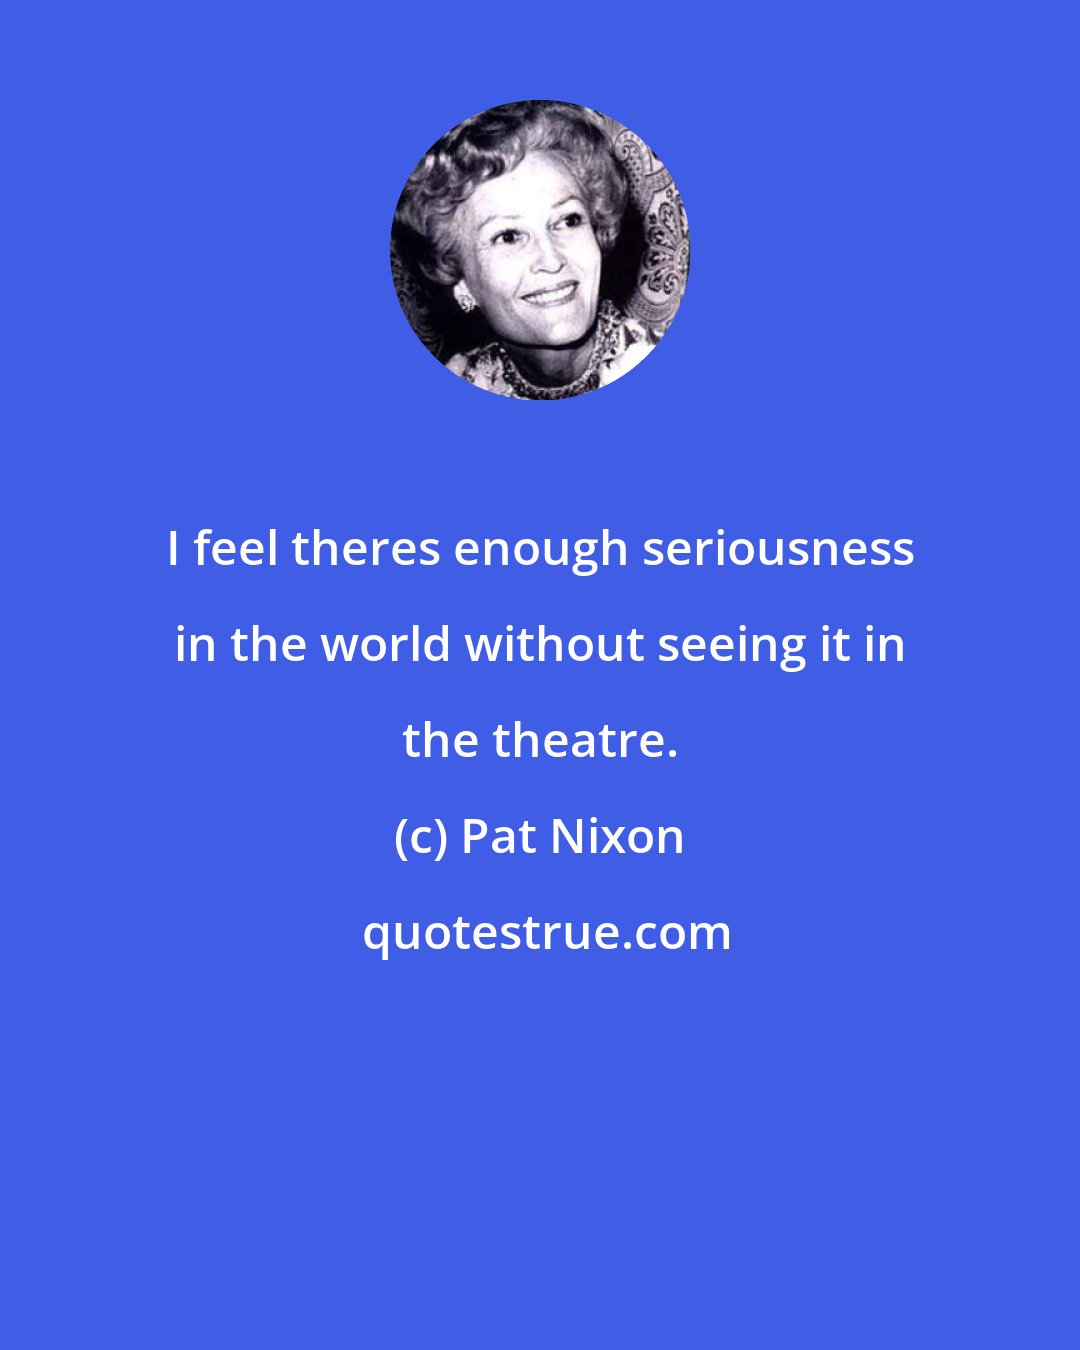 Pat Nixon: I feel theres enough seriousness in the world without seeing it in the theatre.